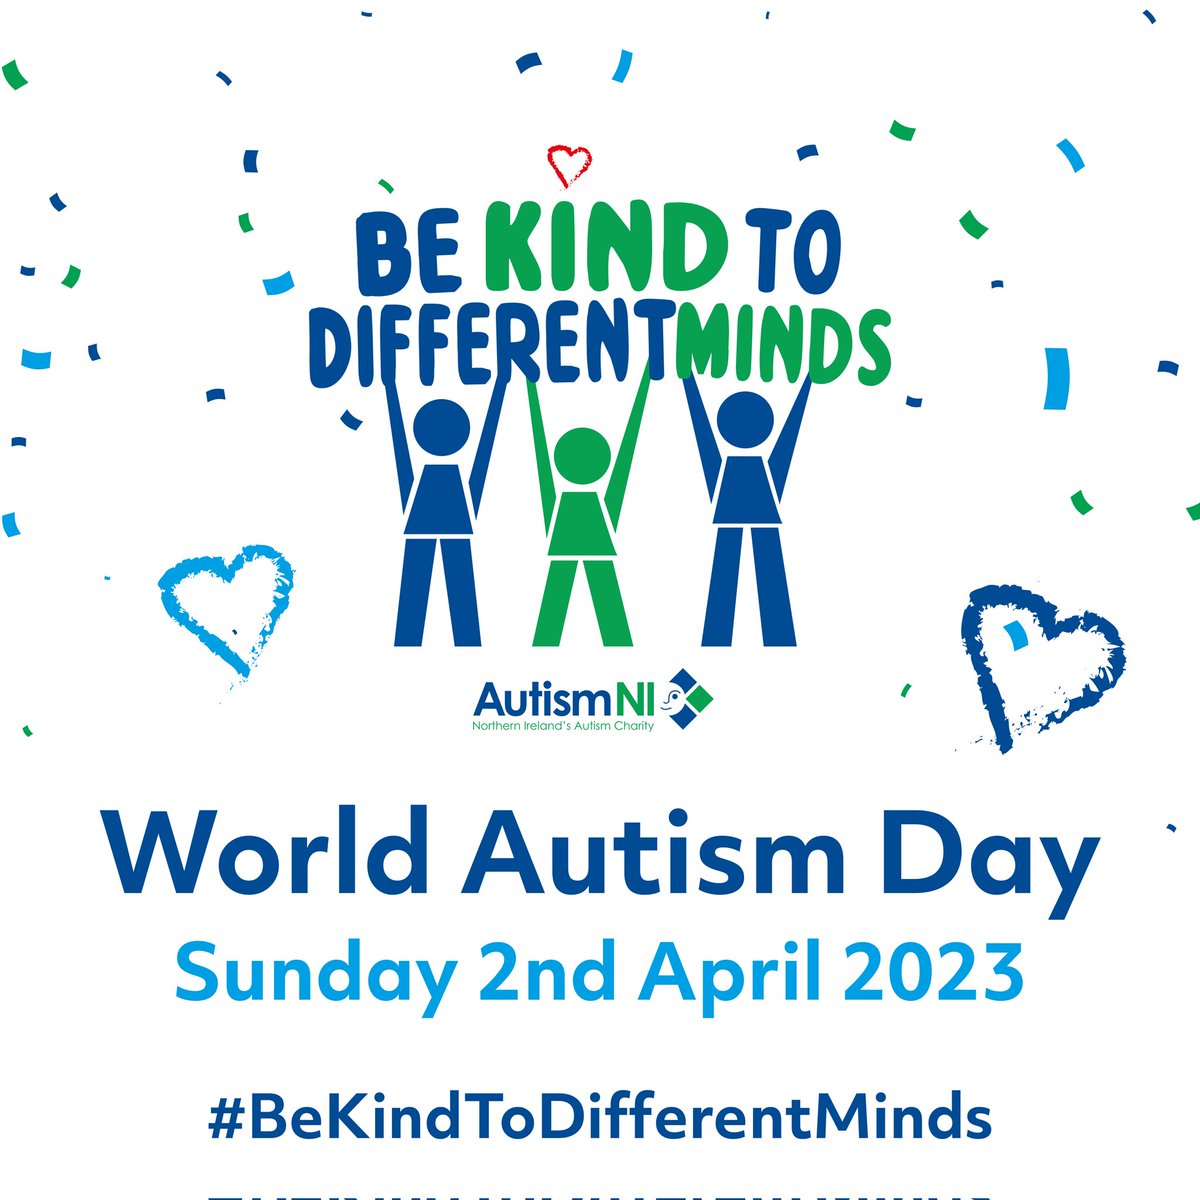 Happy Autism Awareness Day!
I have Autism, it is a lifelong condition which has affected my development of social and communication skills. It can affect how I relate to people and situations. It makes me who I am. We are all different...be kind!
#BeKindToDifferentMinds #AutismNI